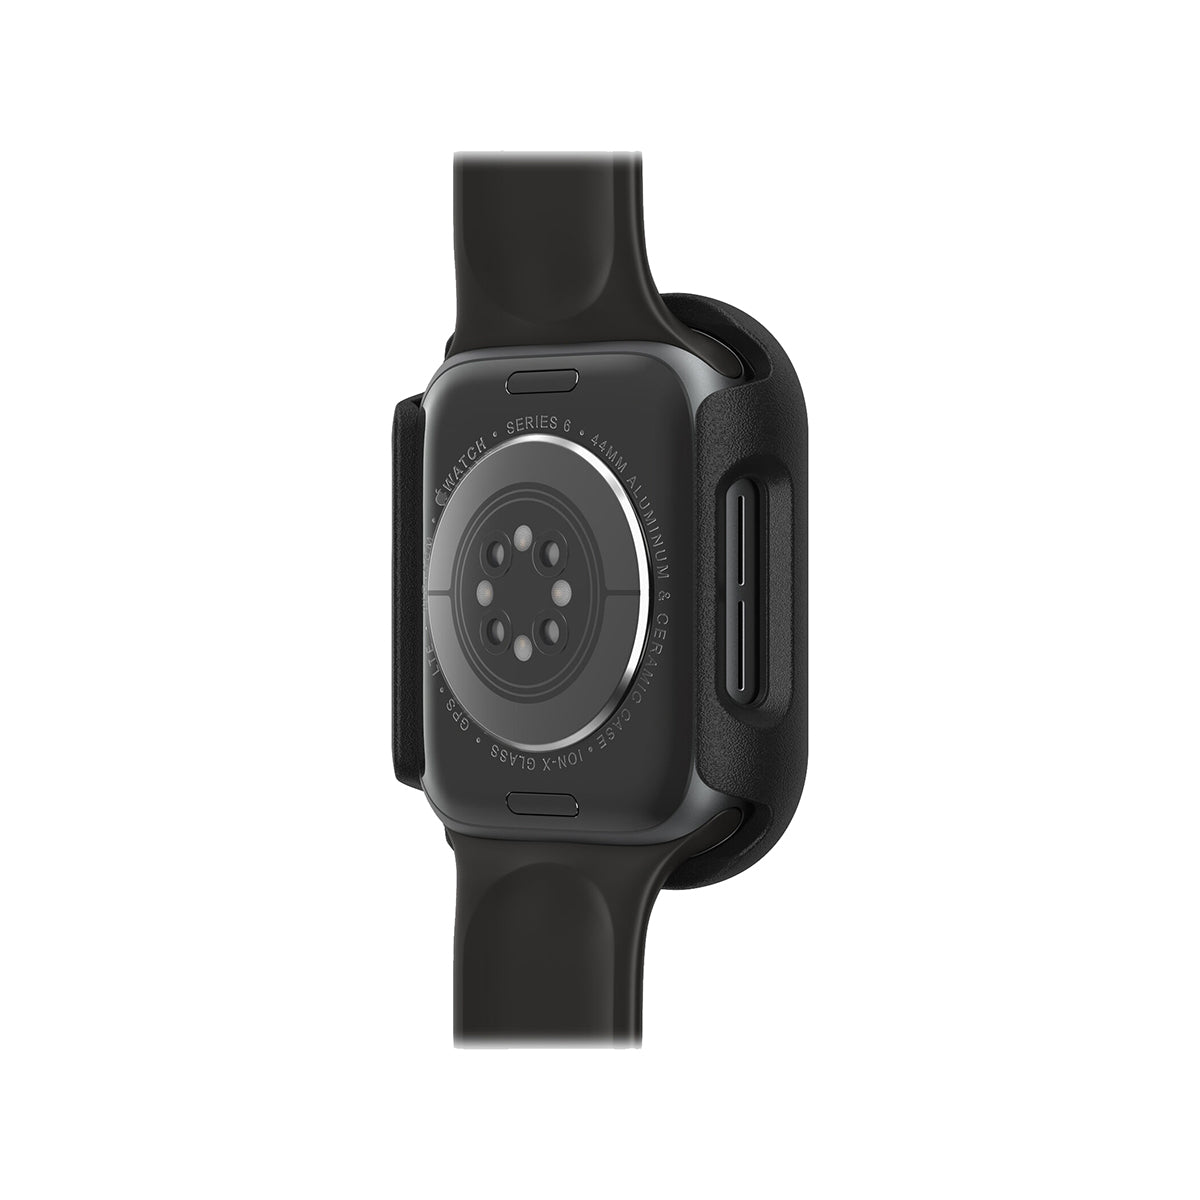 Otterbox bumper case for Apple watch